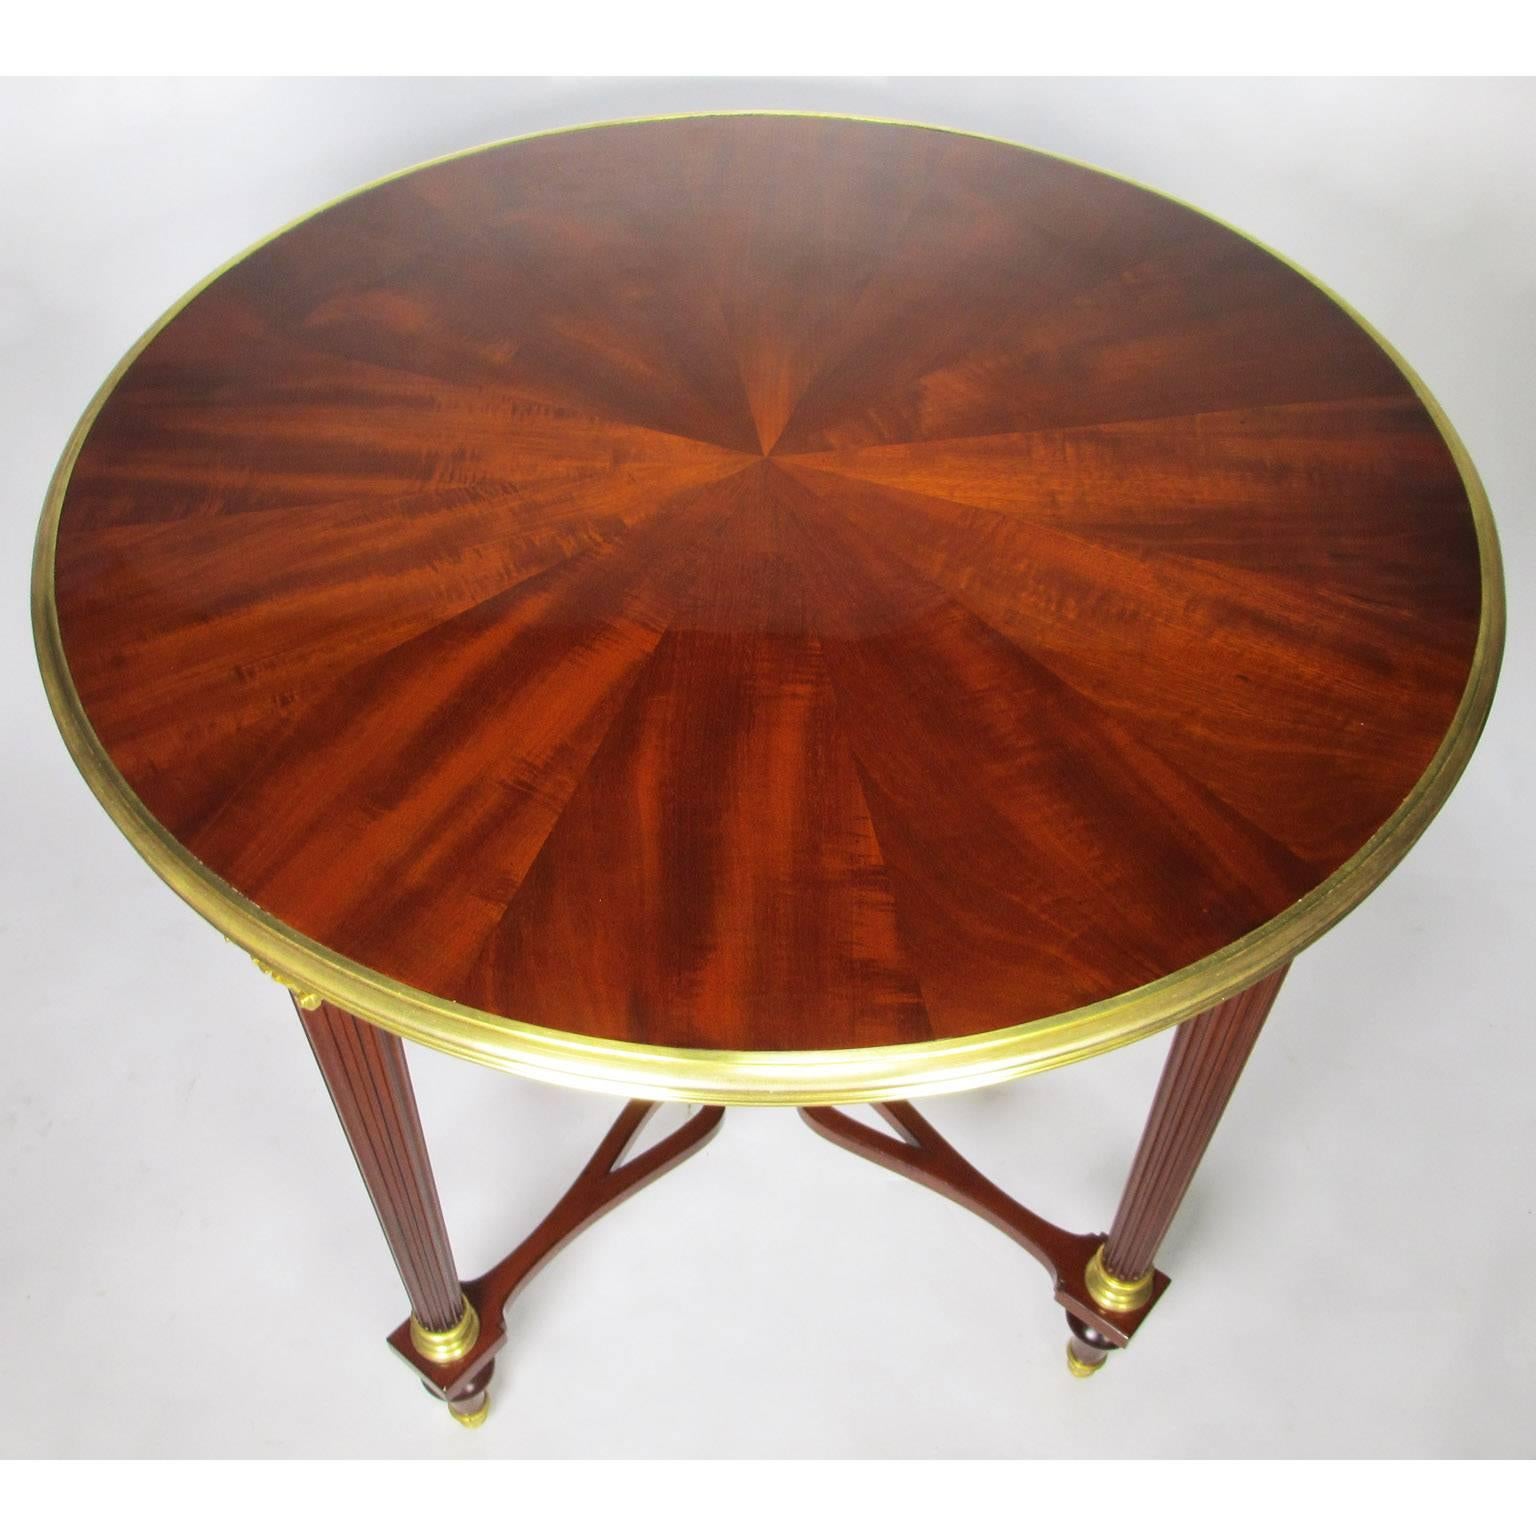 A very fine French 19th-20th century Louis XVI style mahogany and gilt bronze-mounted circular side table (Gueridon) by Maison Jansen, Paris. The tapered fluted legs fitted with classical ormolu capitols descending into a sunburst shaped stretcher